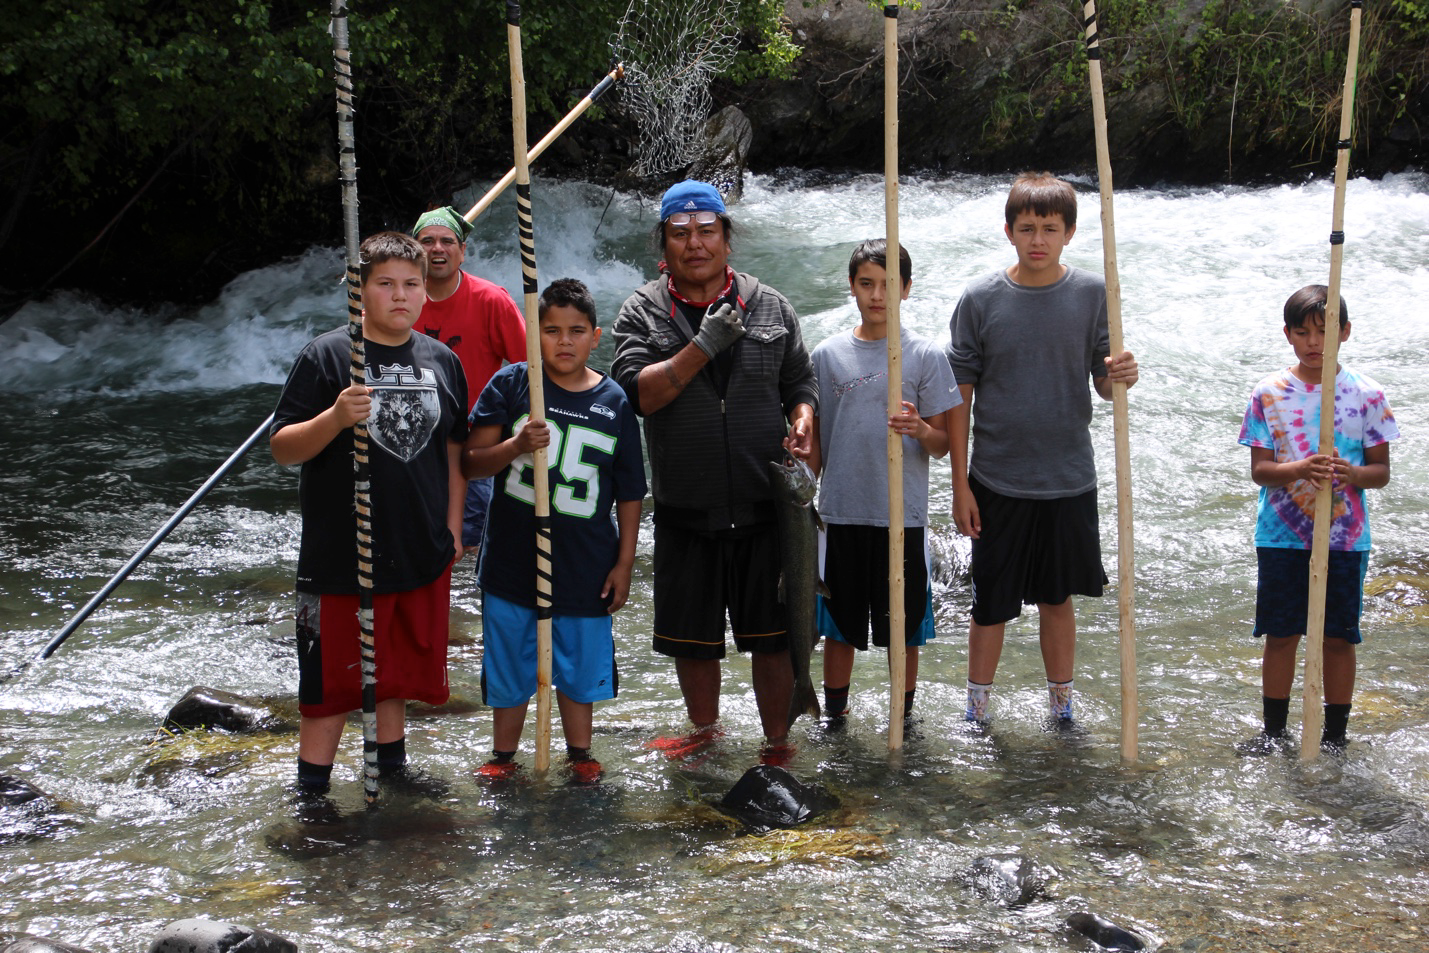 Youth Salmon Campers learning about these traditional sites and practices in Riggins, Idaho.